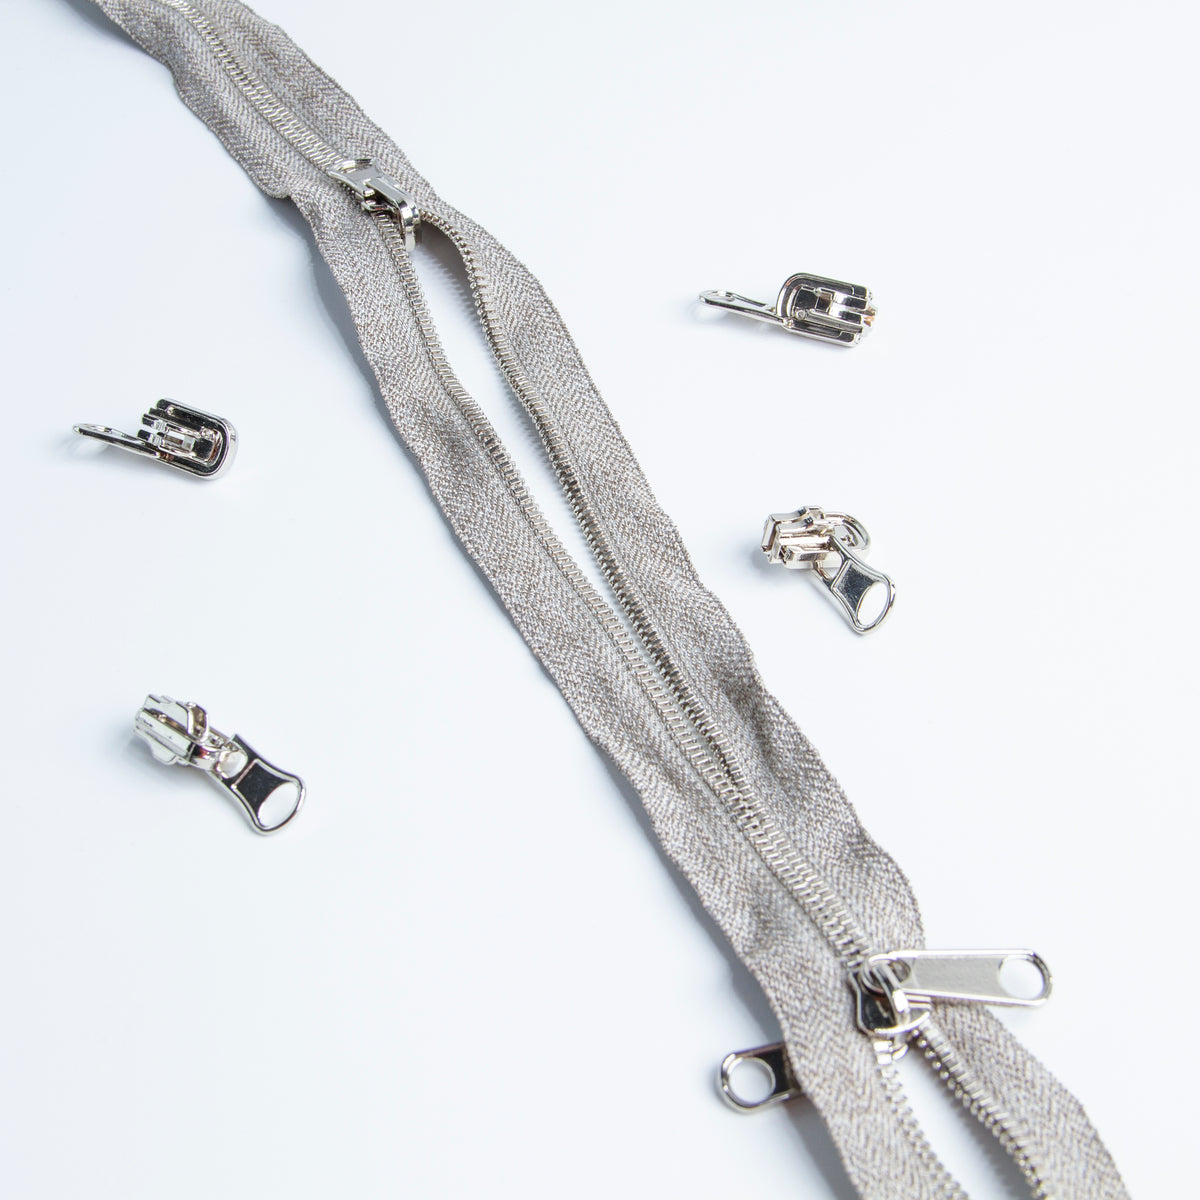 Silver Plated Conductive Zipper, Slider and Tape are seperated